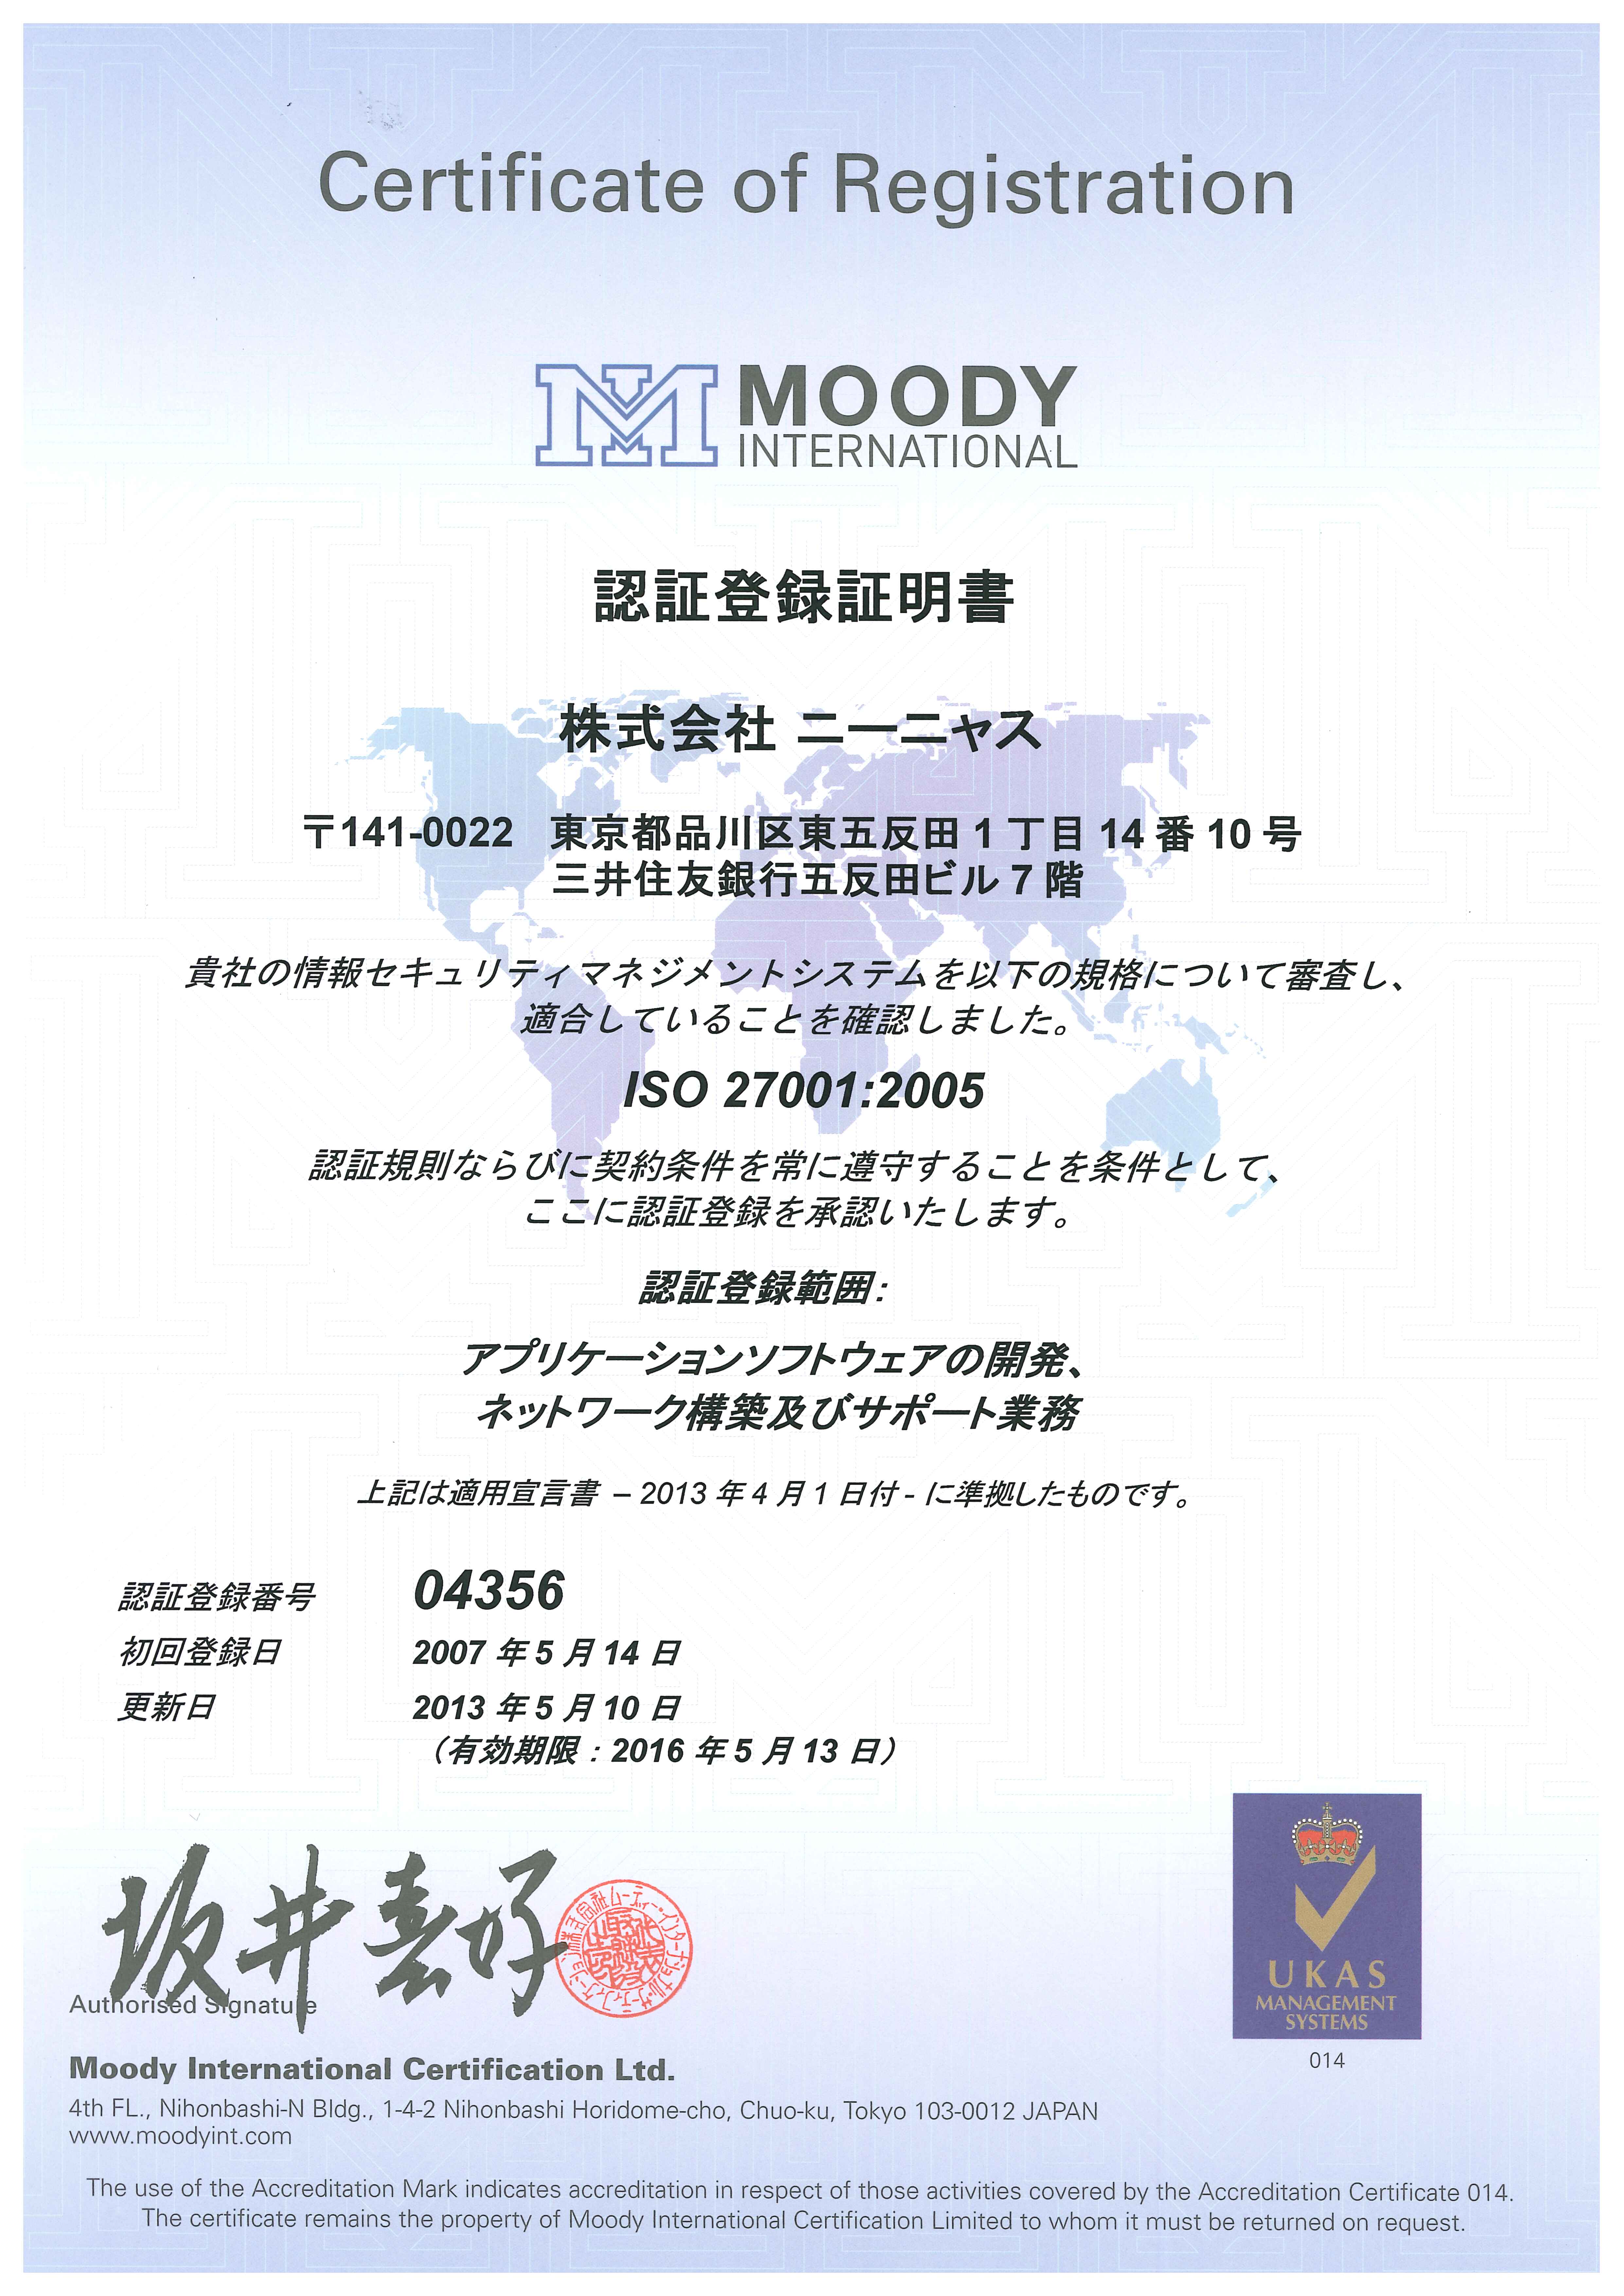 ISO27001/2005認証登録証明書